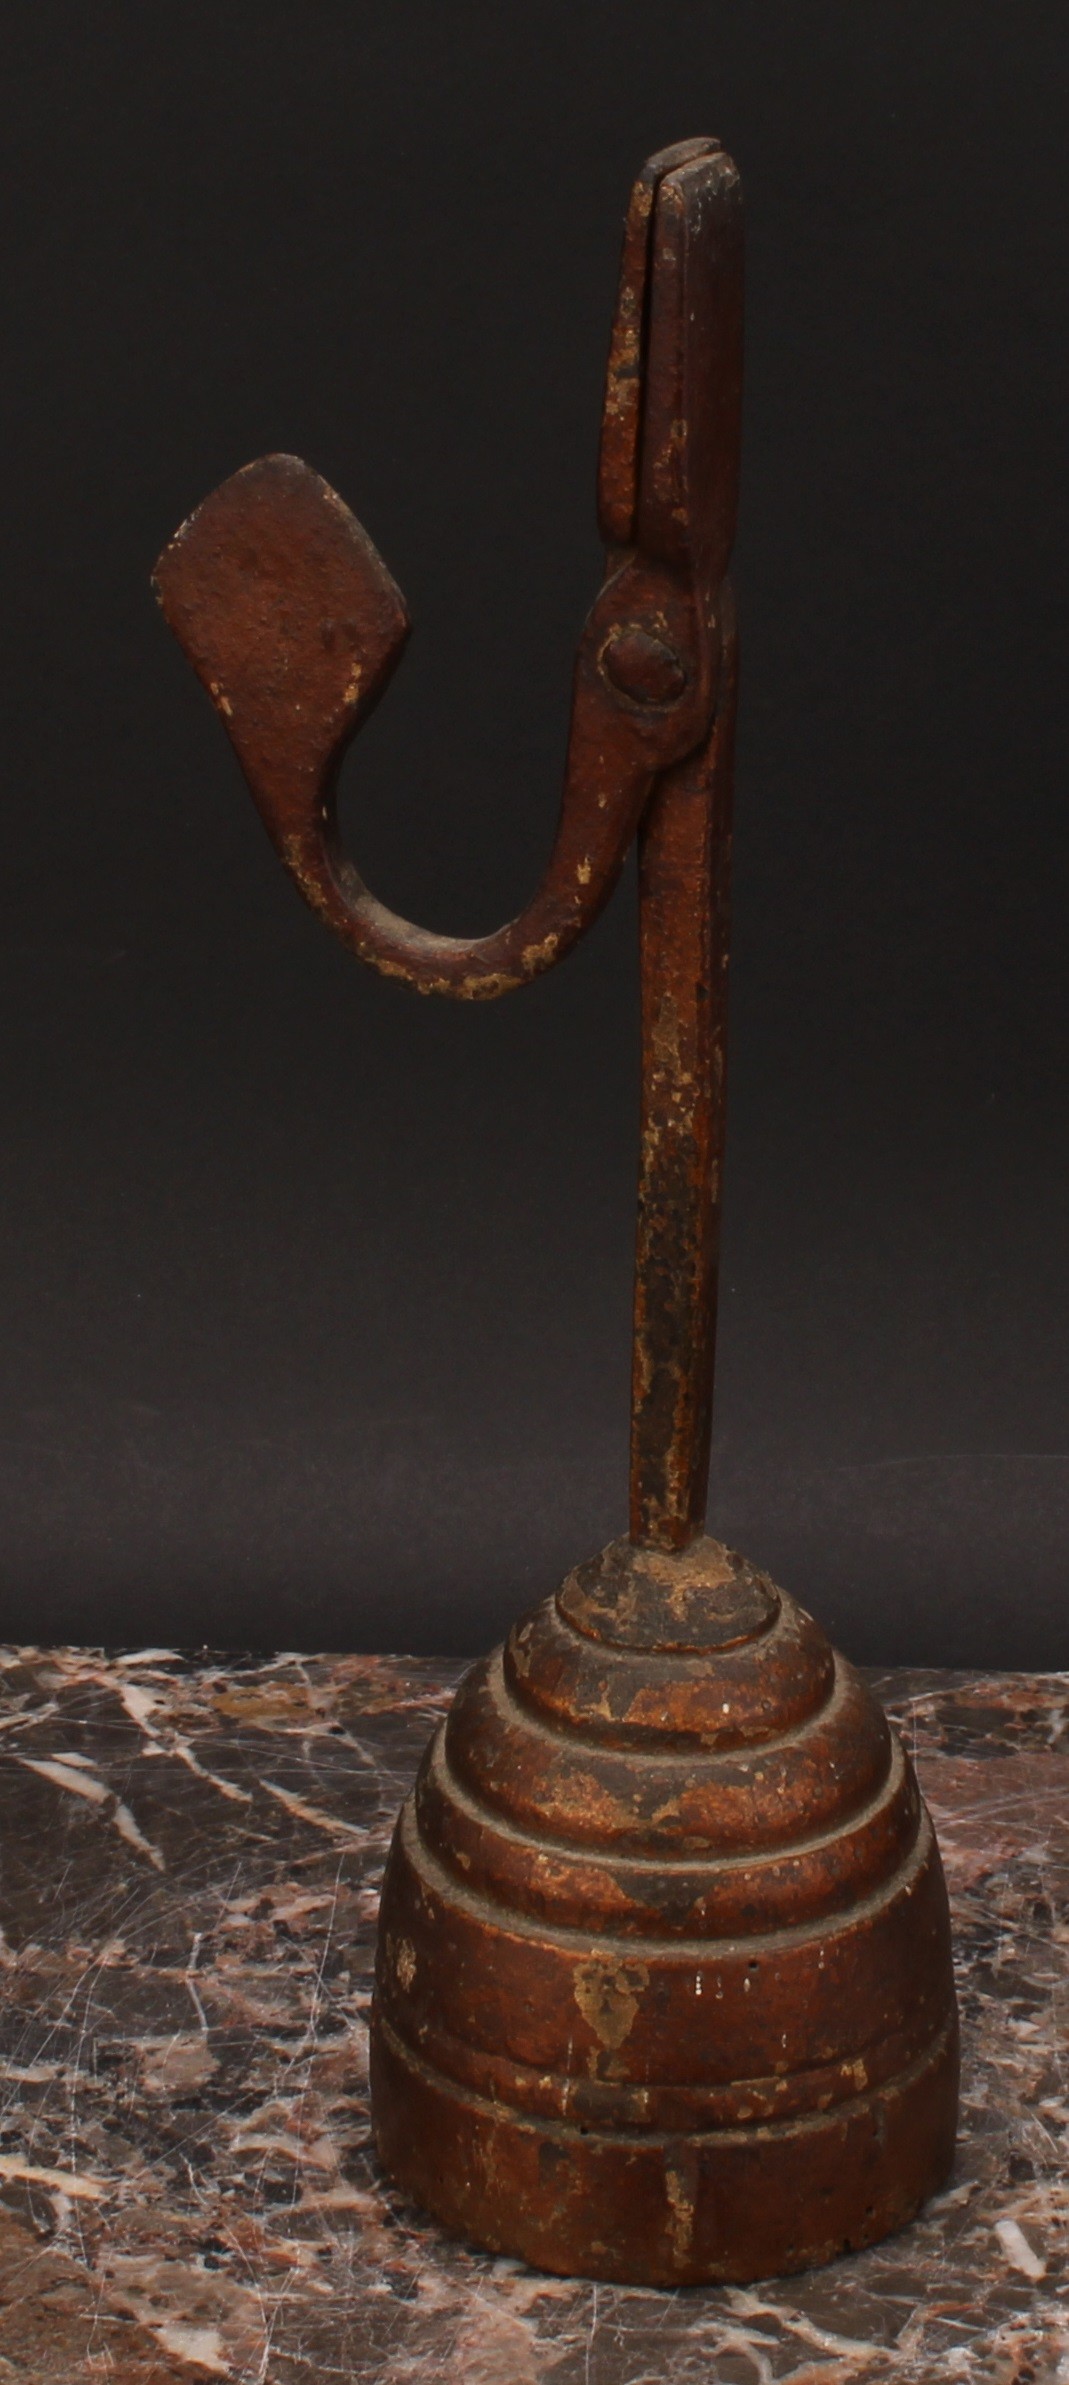 A wrought iron nip rushlight holder, stepped circular wood base, 27cm high, 18th/19th century - Image 2 of 3